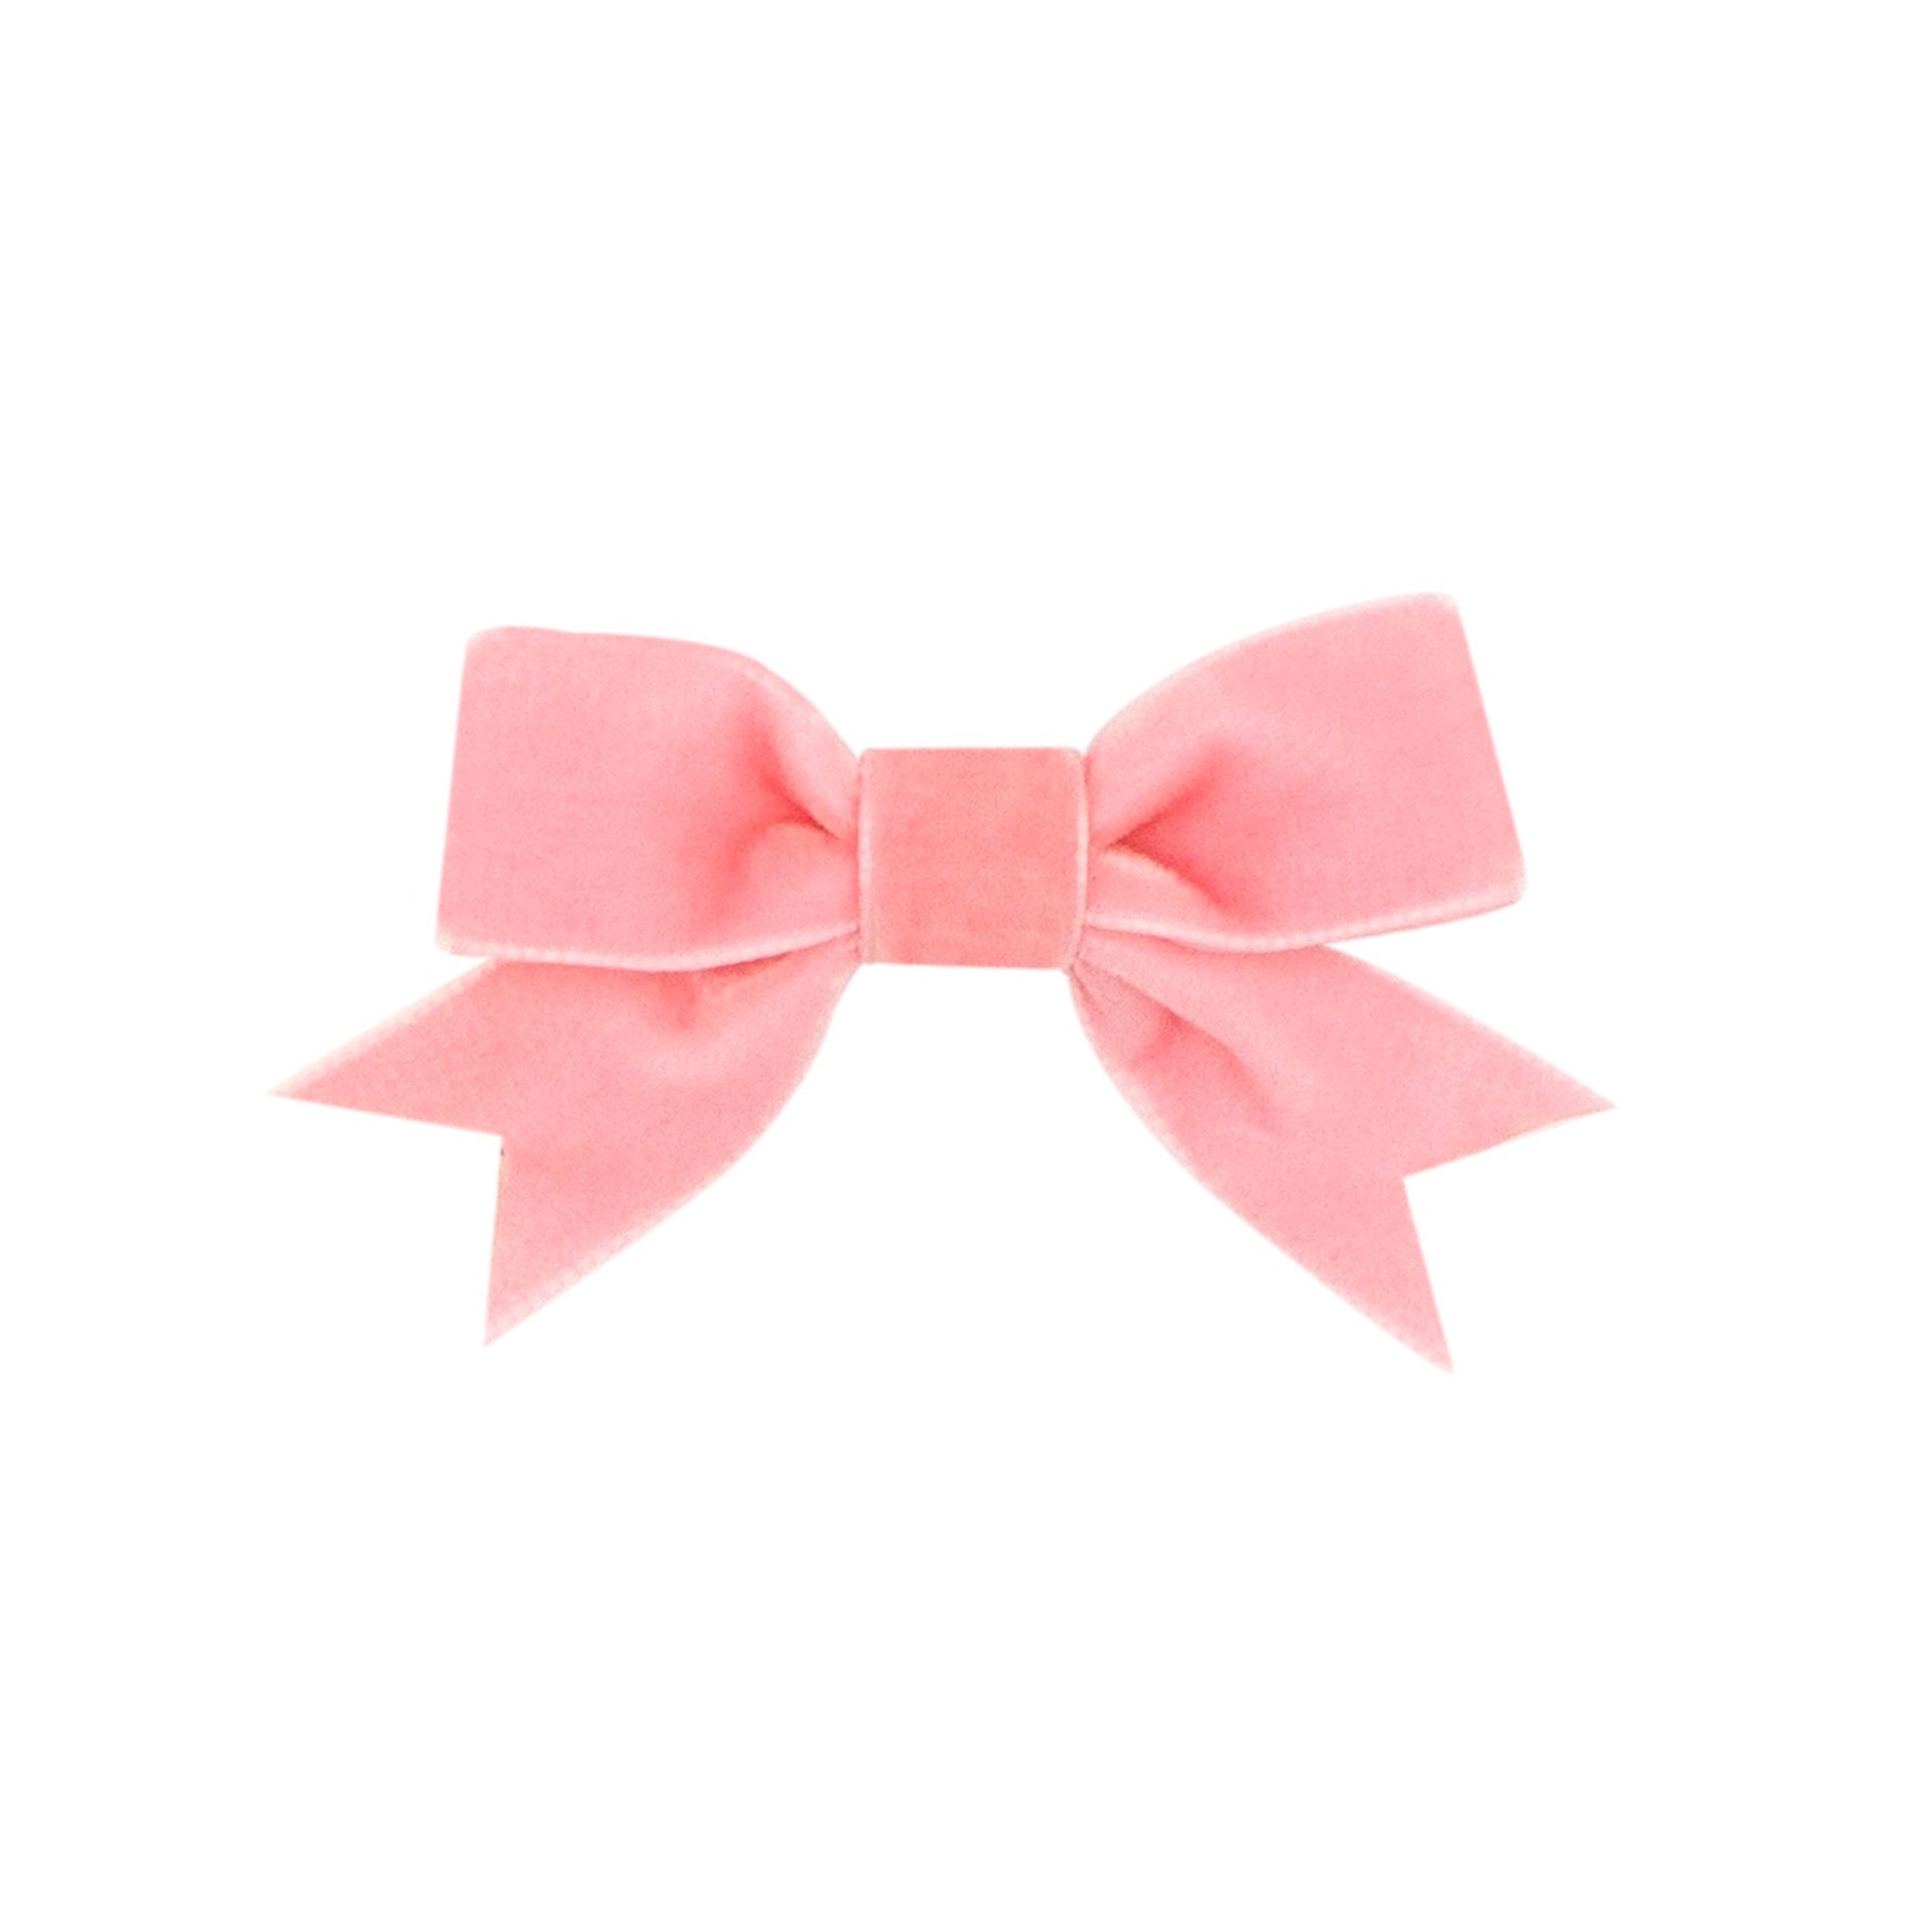 Wee Ones Mini Monogrammed Grosgrain Girls Hair Bow - Light Pink with Hot Pink Initial R